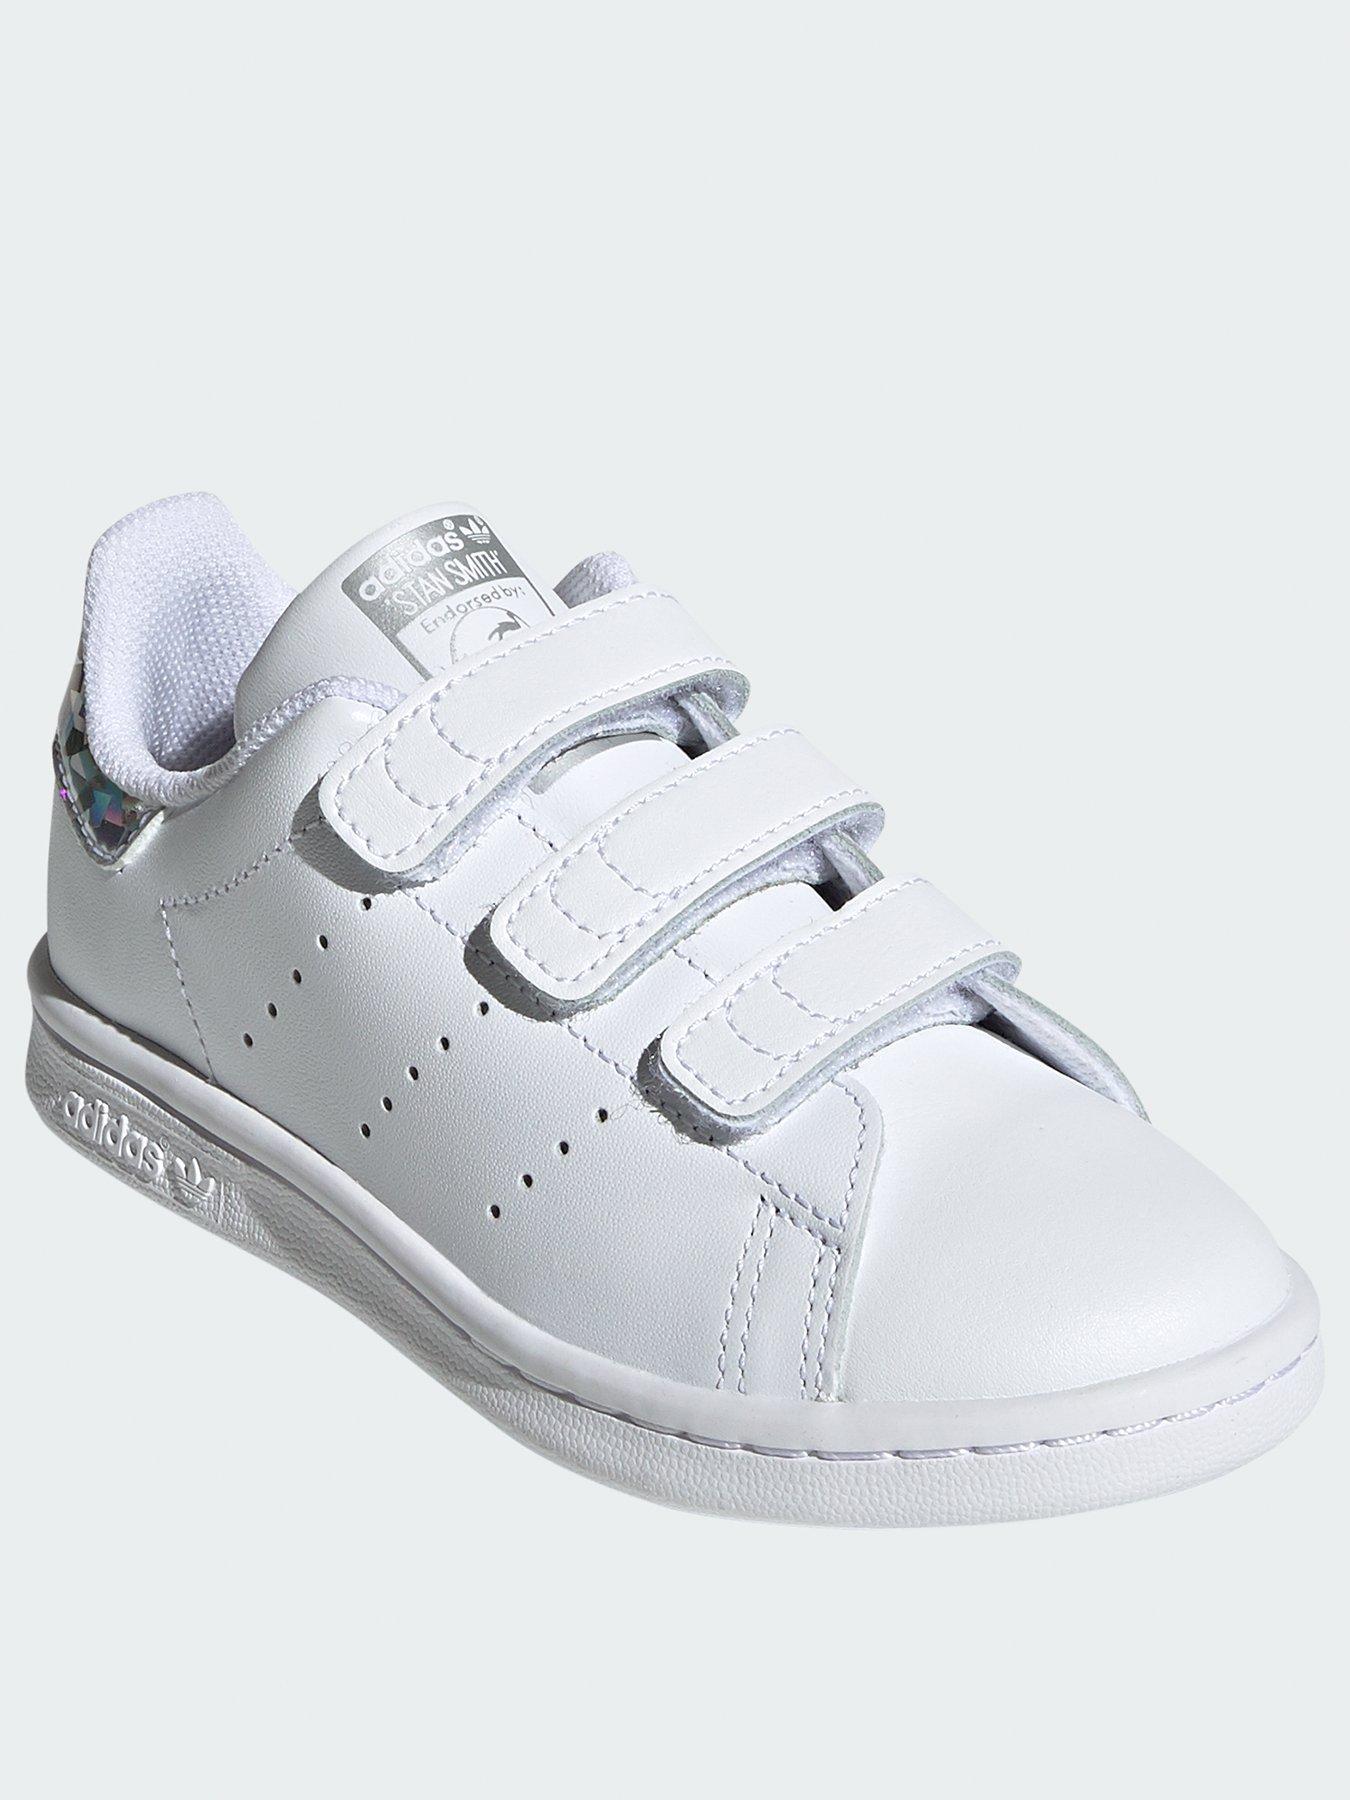 stan smith white trainers